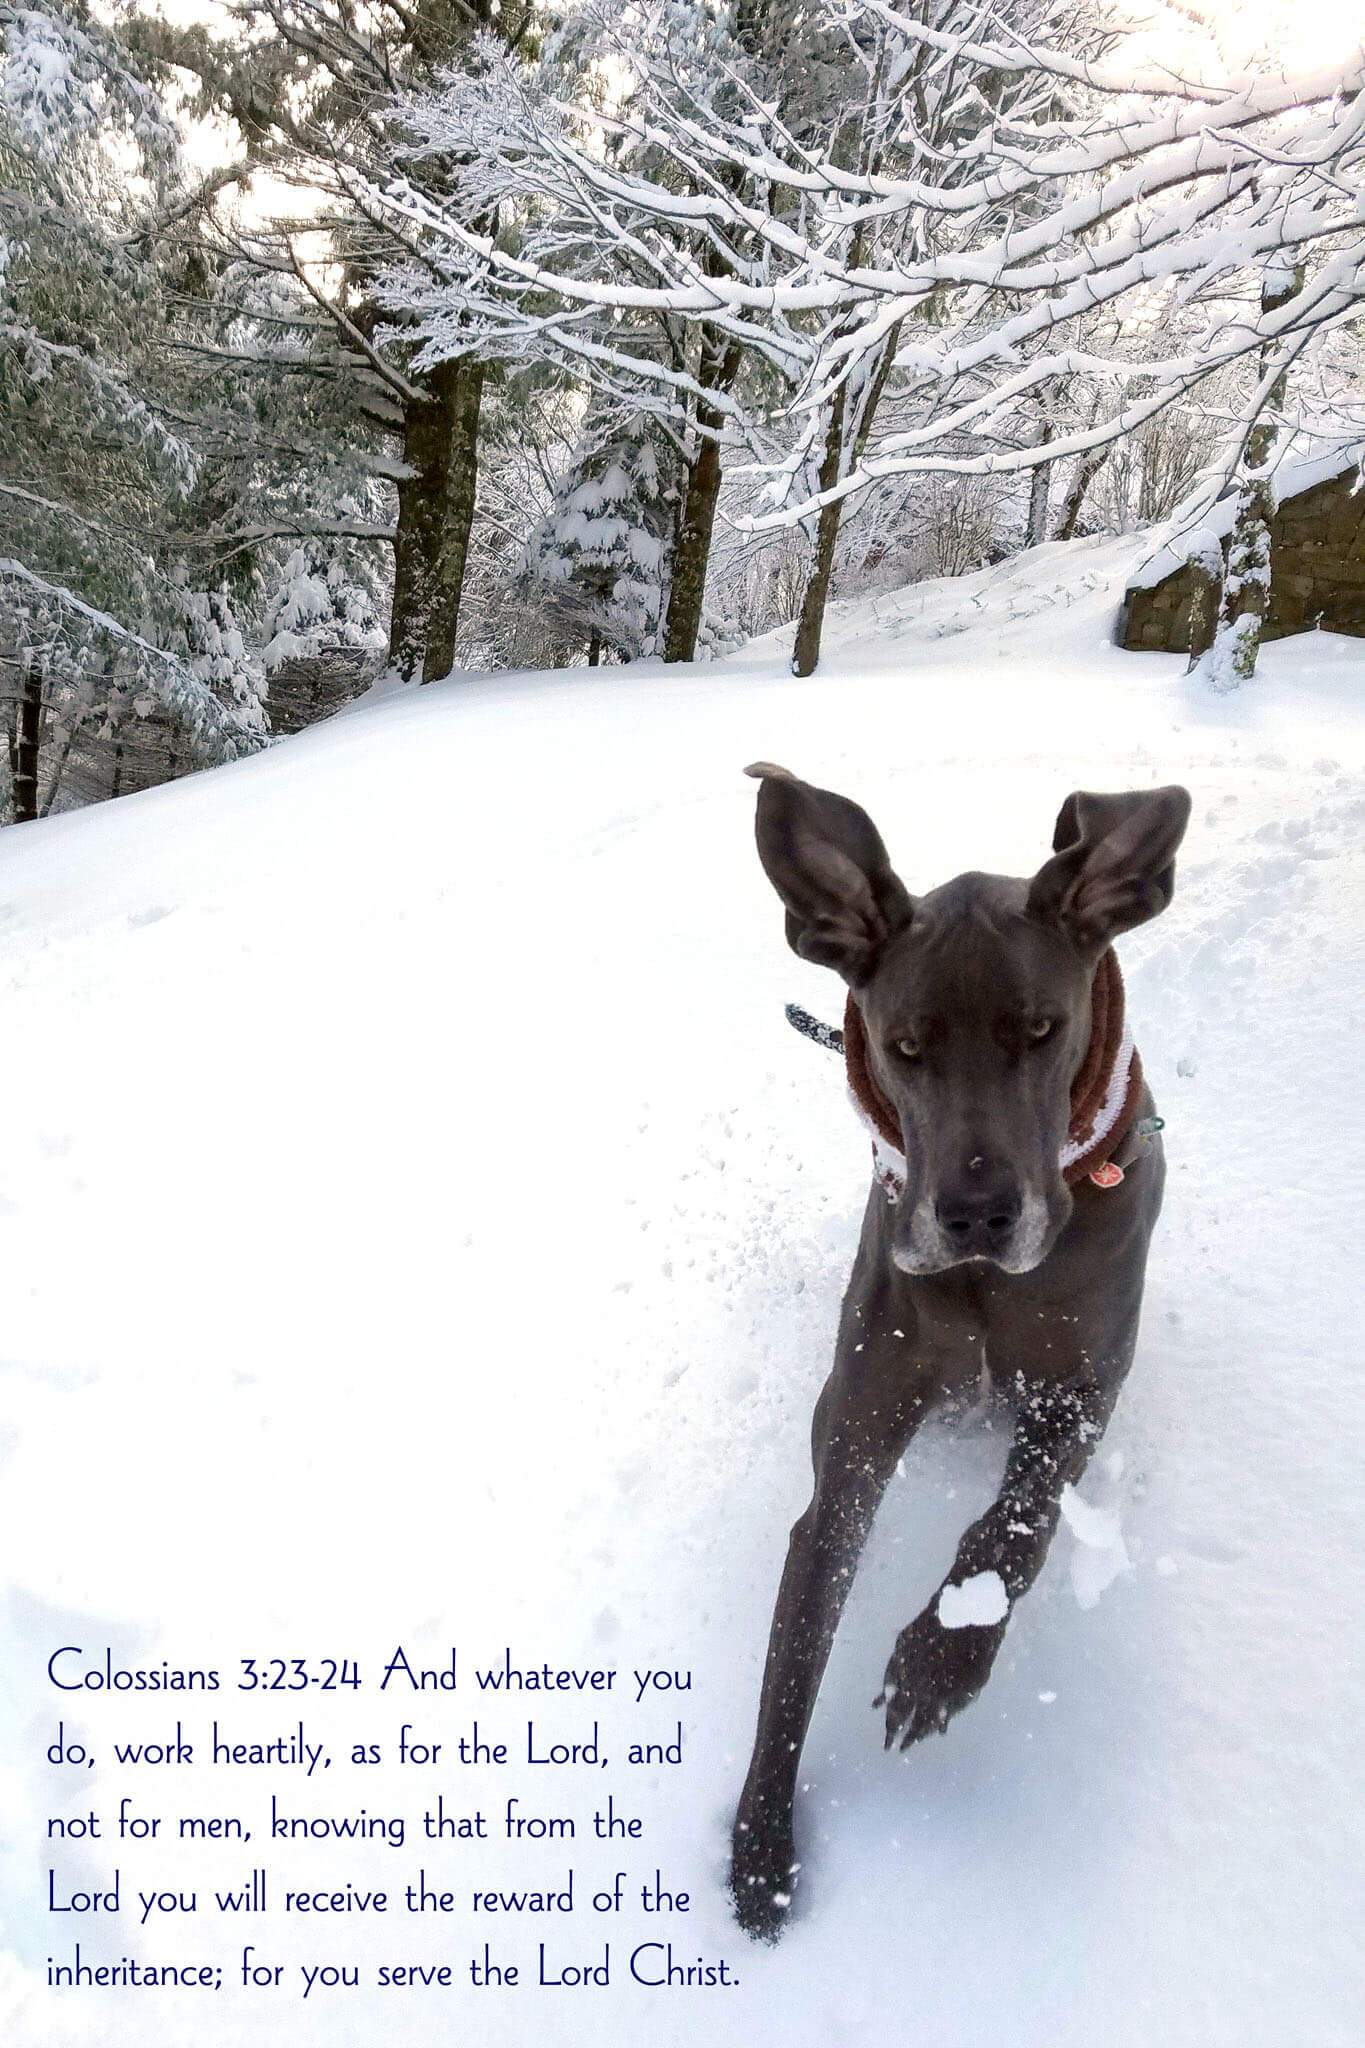 Colossians 3:23-24 with Puddles running down a snowy hill on a sunny day